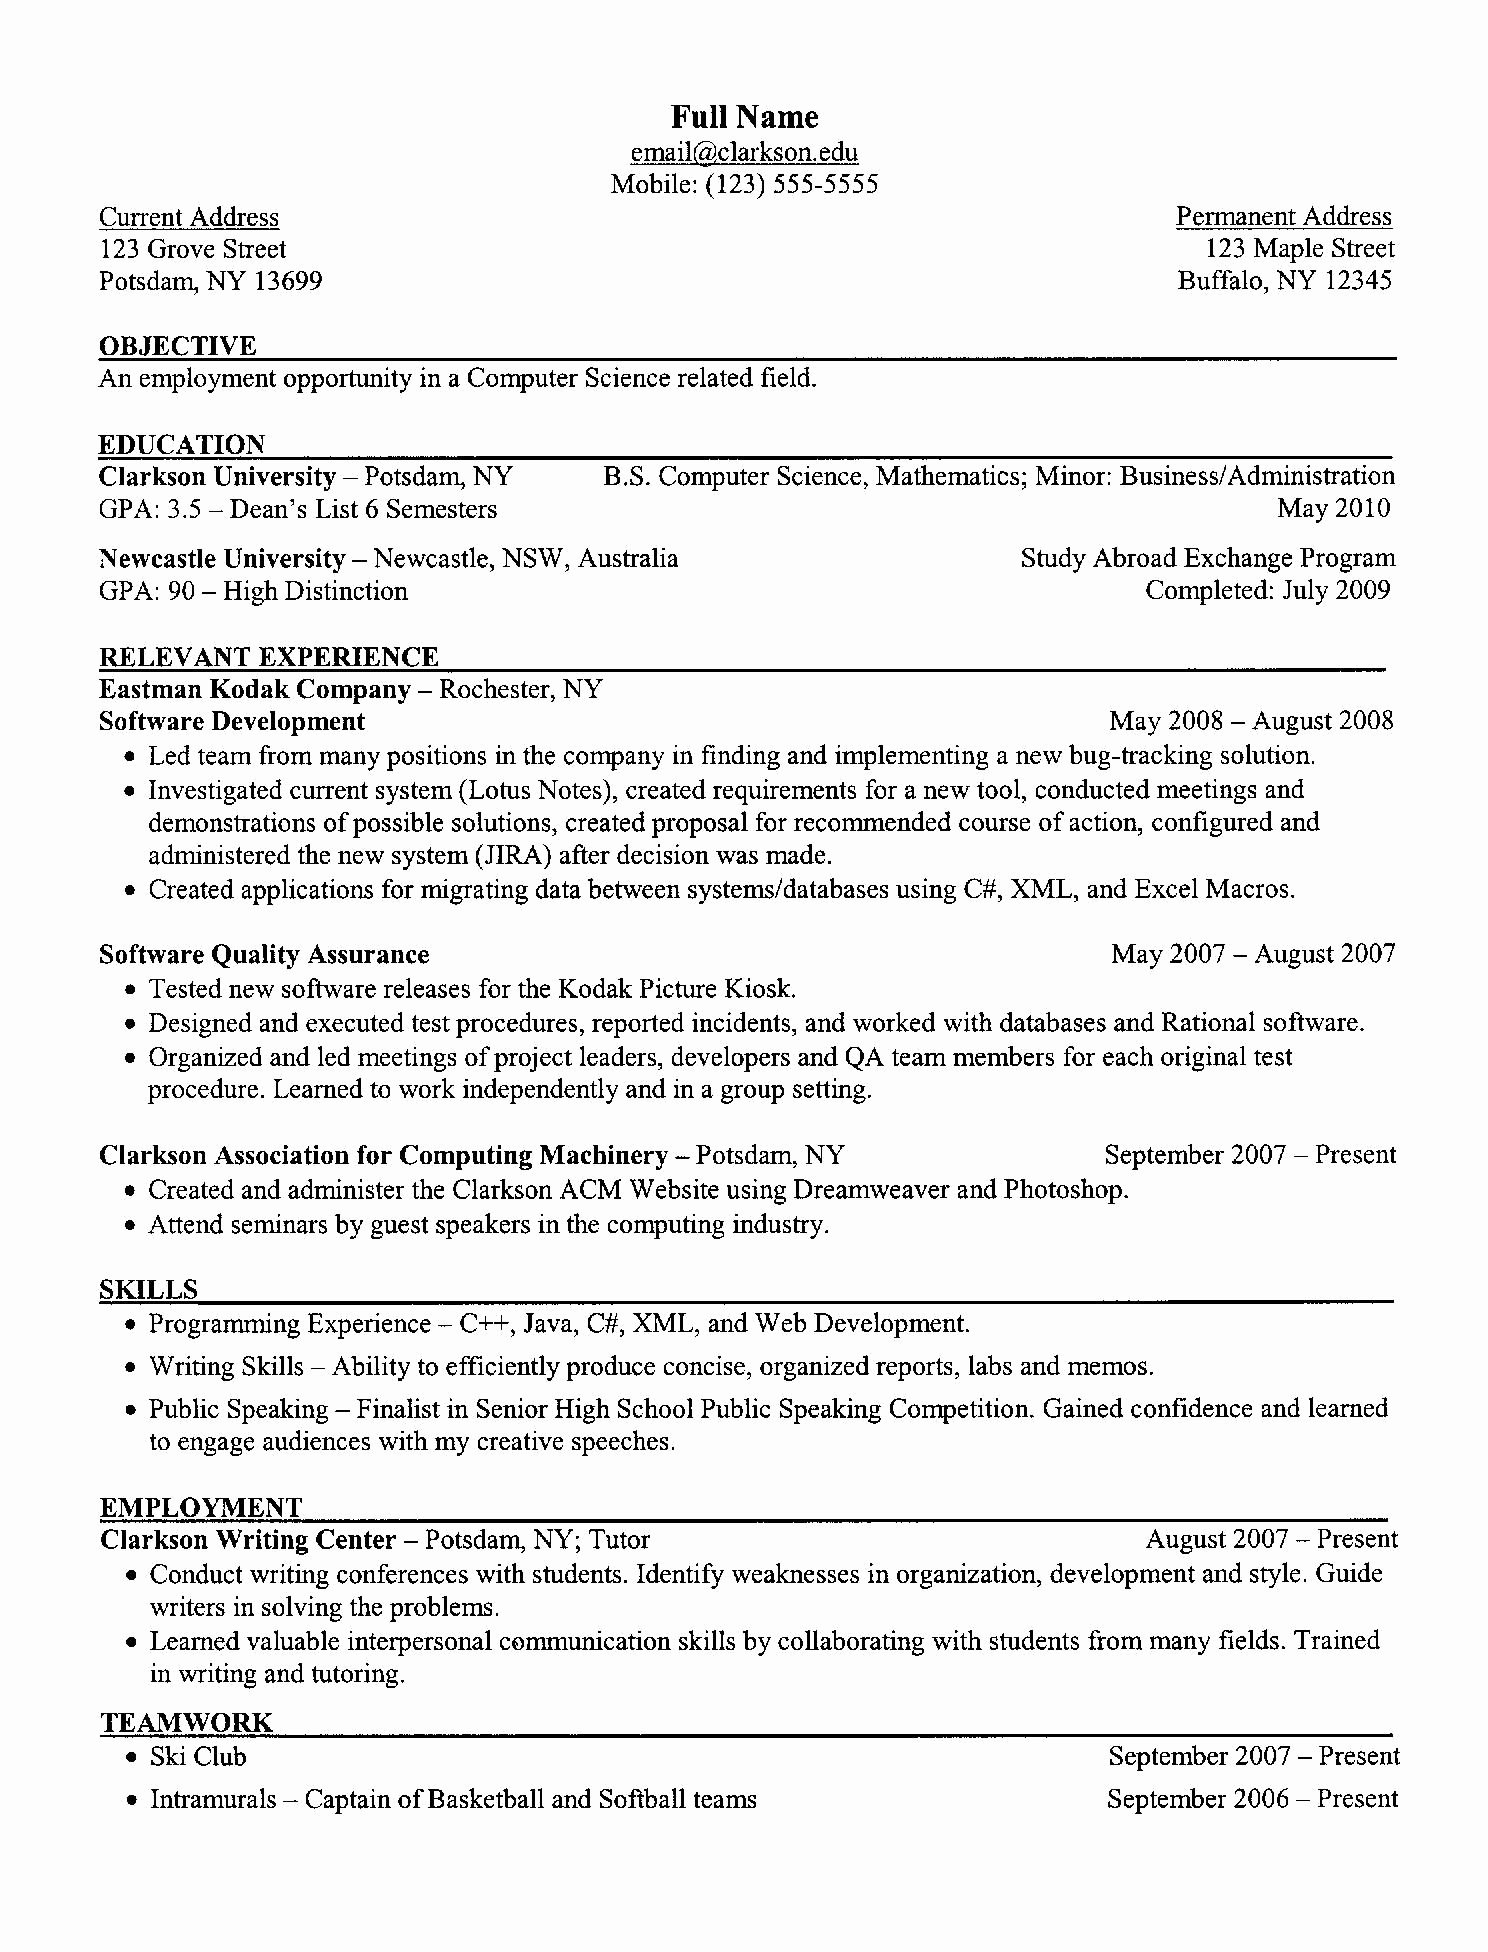 Computer Science Resume Template Unique Skills that You Should Not Include On Resume